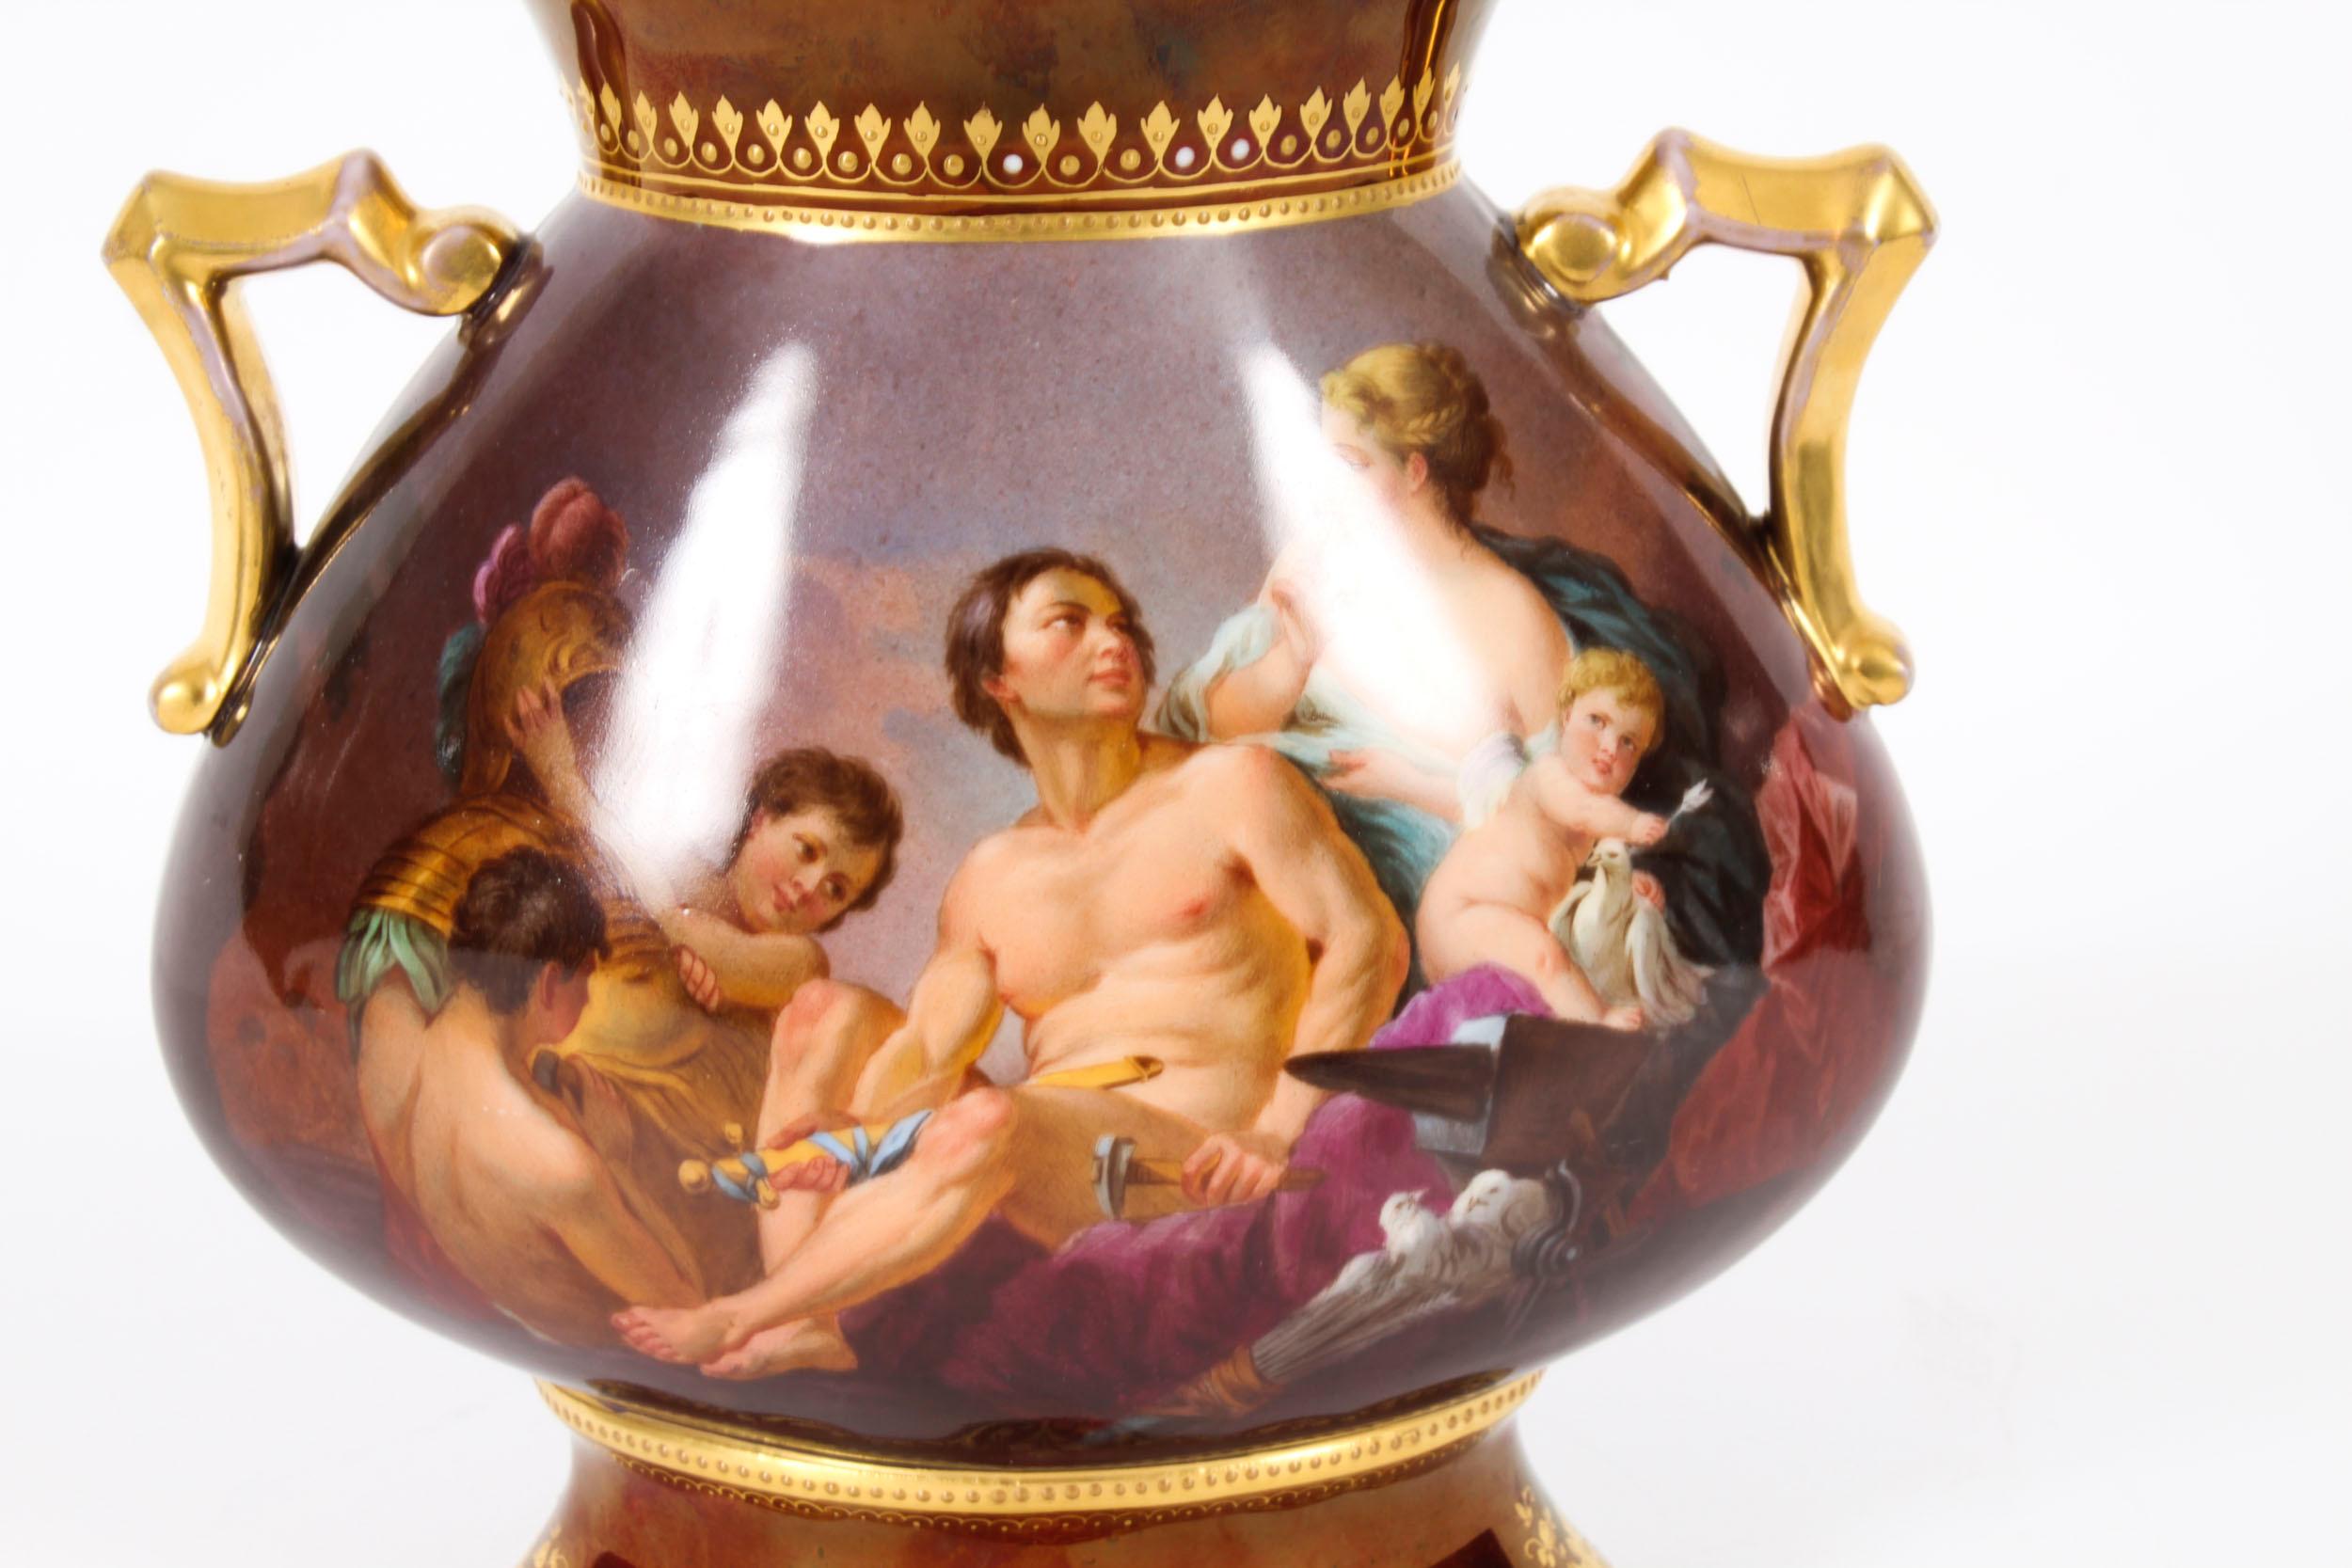 A superb quality and very beautiful antique Vienna Porcelain  hand painted two-handled vase,  Circa 1880 in date.

Painted with a mythological figural group scene on one side, and playful cherubs on the other. All on a stunning gilded ox-blood red